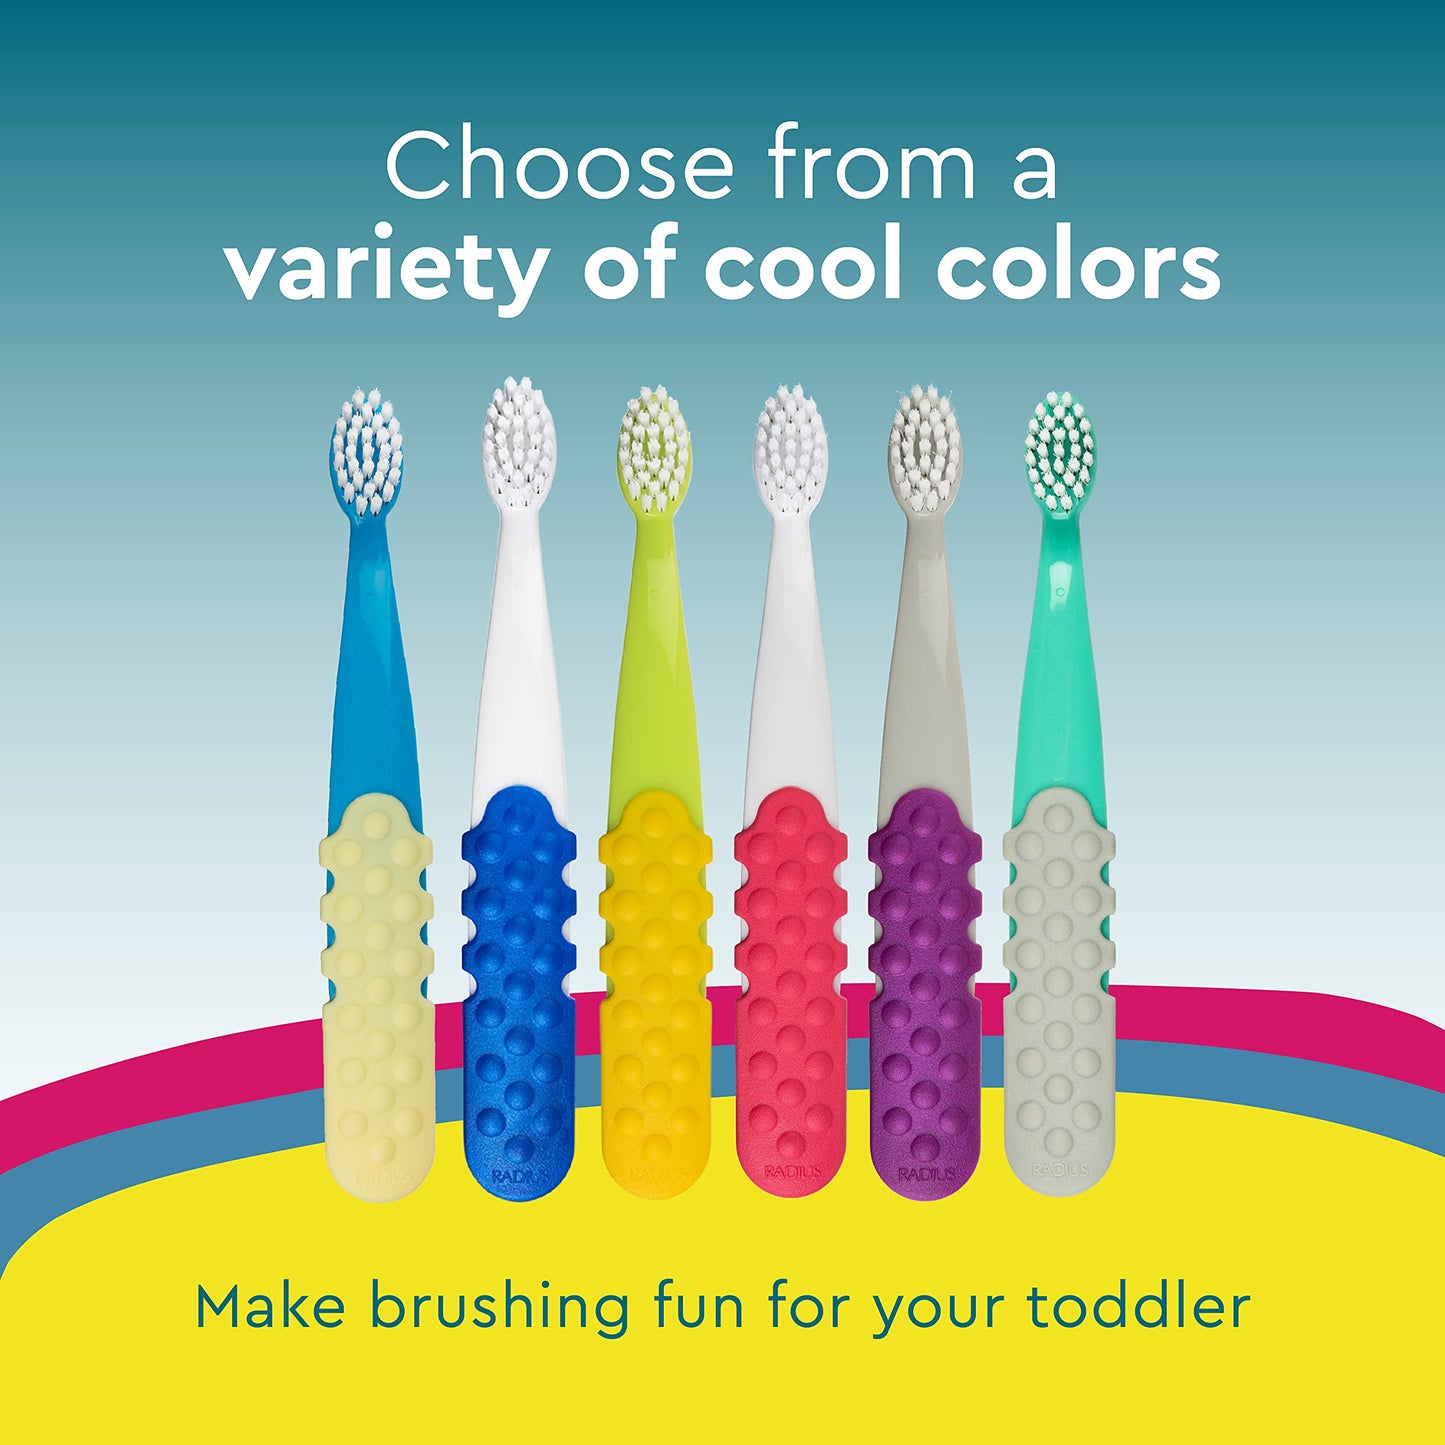 RADIUS Totz Plus Brush Kids Toothbrush Silky Soft BPA Free ADA Accepted Designed for Delicate Teeth & Gums for Children 3 Years & Up - Assorted - Pack of 3